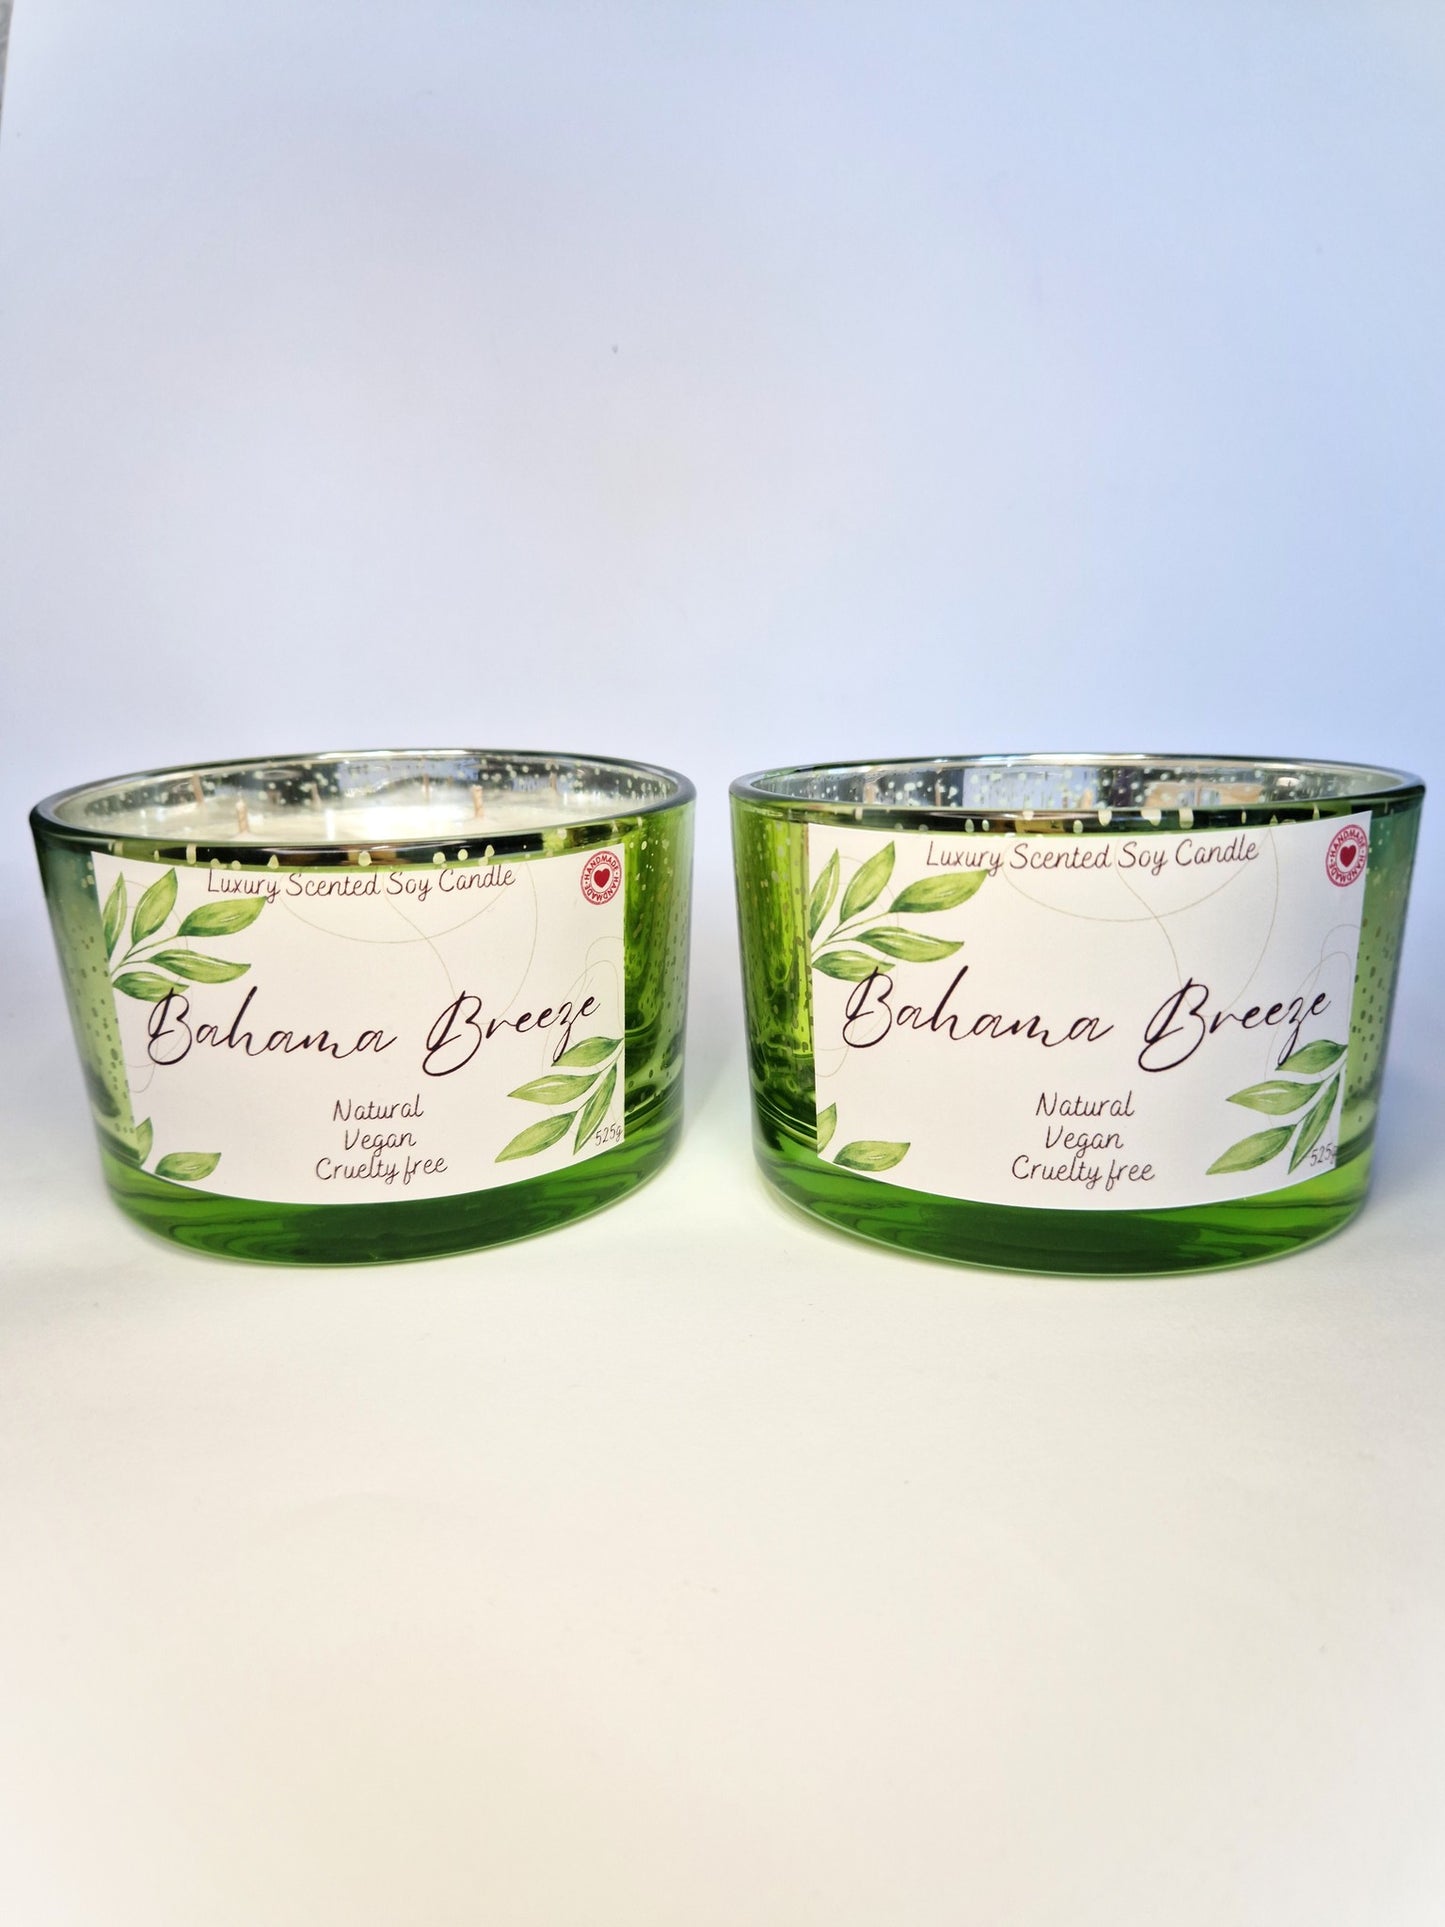 Bahama Breeze Luxury Scented Soy Candle